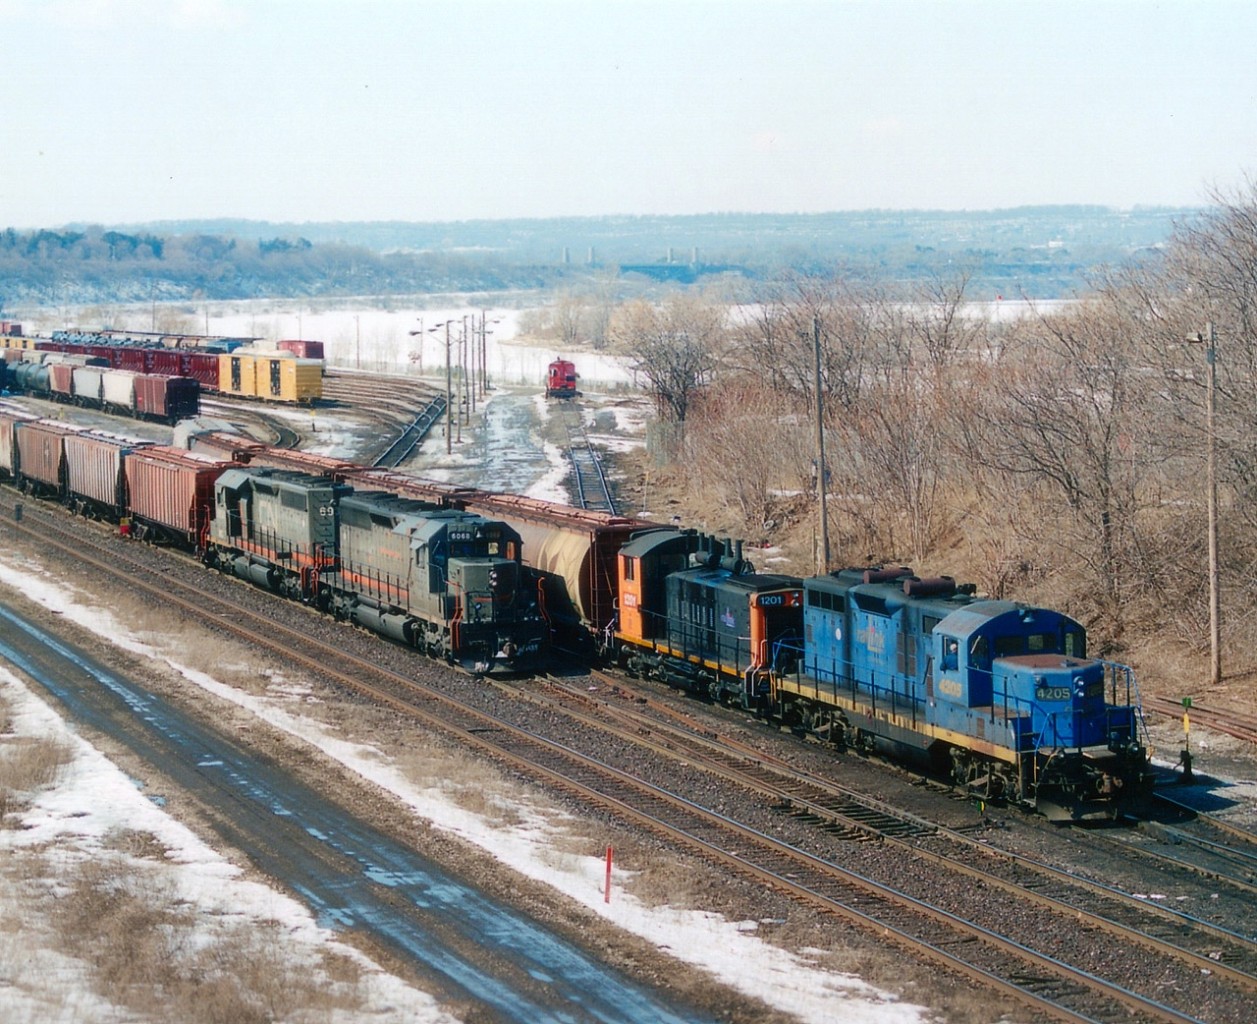 Side by side: RLK 4205 and 1201 at work in the former CN (now SOR) Stuart St yard alongside Niagara-bound CN train GCFX 6068 and WC 6934. Confusion abound (for me, anyway)at this time as old CN SD40s were being upgraded to SD40-3 and the transition from CN to Alsthom to Wisconsin Central ID was erratic.  These two units were former CN 5112 and 5146. Renumbered and upgraded when GEC Alsthom gray (owned by Connell Finance) to GCFX 6064 and 6068. THEN they were relettered to Wisconsin Central as 6934 and 6938.......but, at the time of this photo the 6068 has not yet been relettered/renumbered. The RLK? Well, 4205 was scrapped in 2008 and the 1201 has gone to an industrial park in Sarnia, ON.